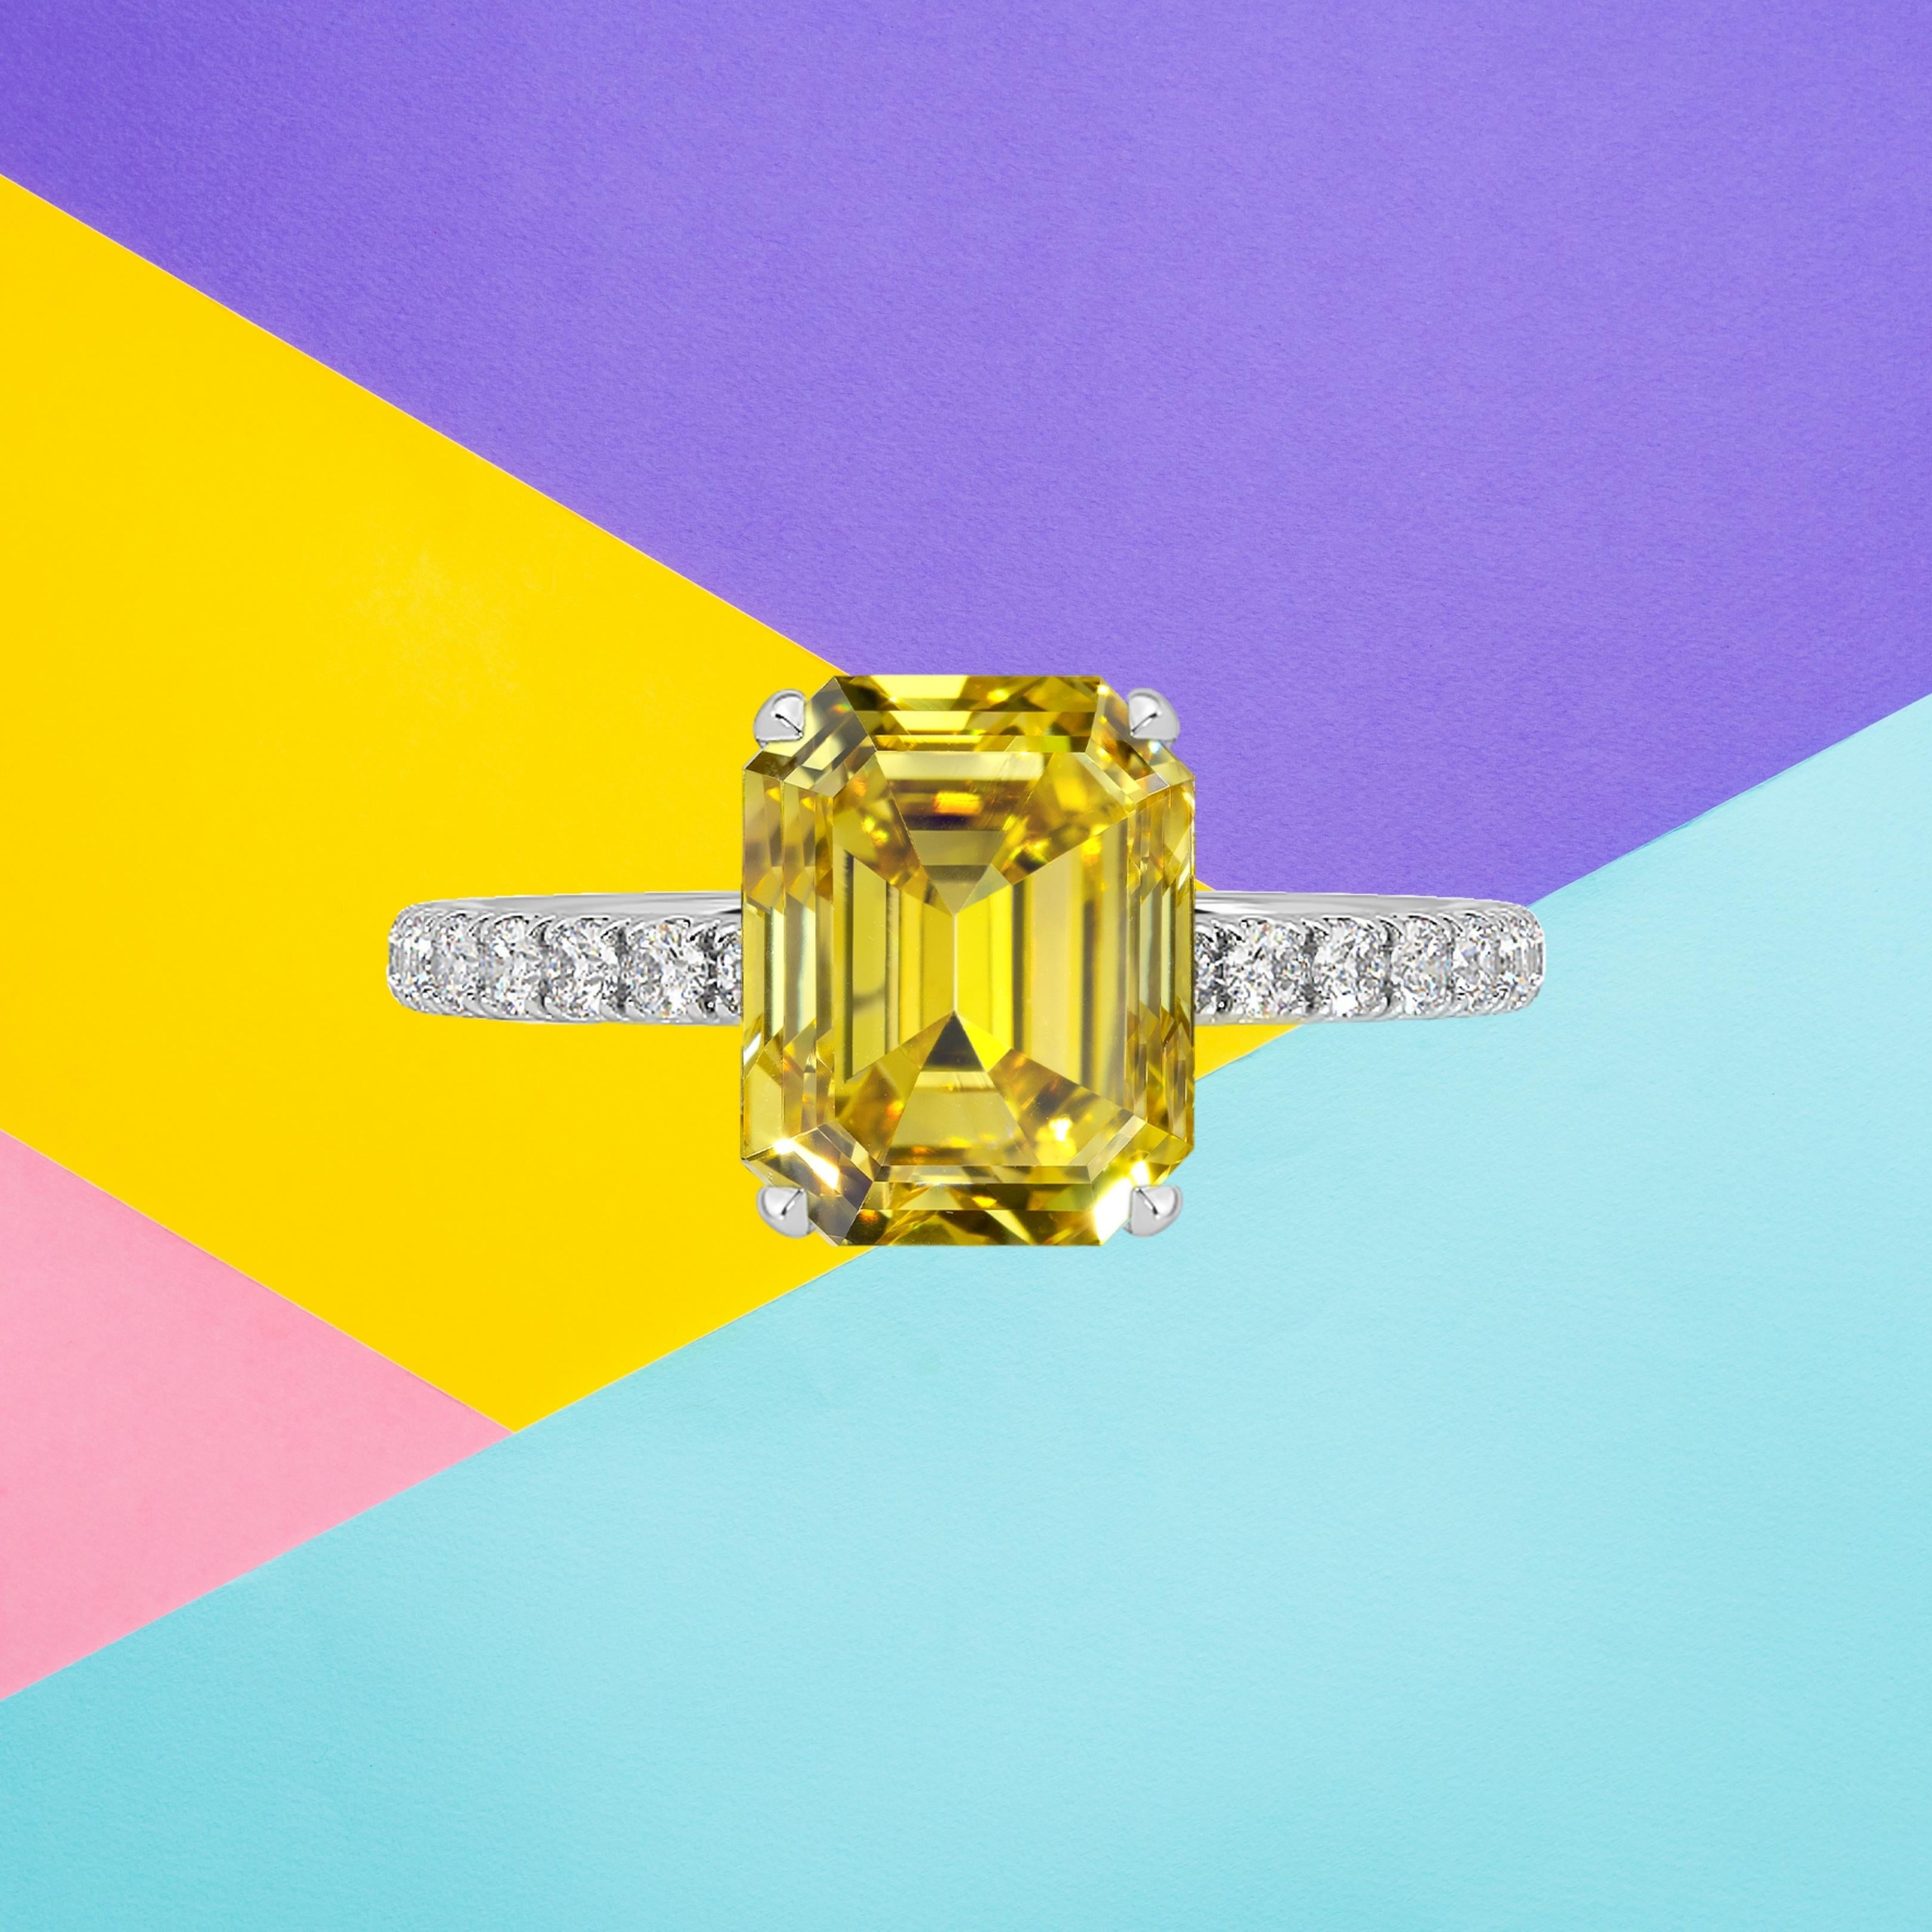 This emerald cut diamond weighs 2.30 carat and is certified 'Fancy Vivid Yellow' color by the Gemological Institute of America. The GIA has also assigned a VS2 clarity grade to the stone. The diamond has been inscribed with the certificate number to